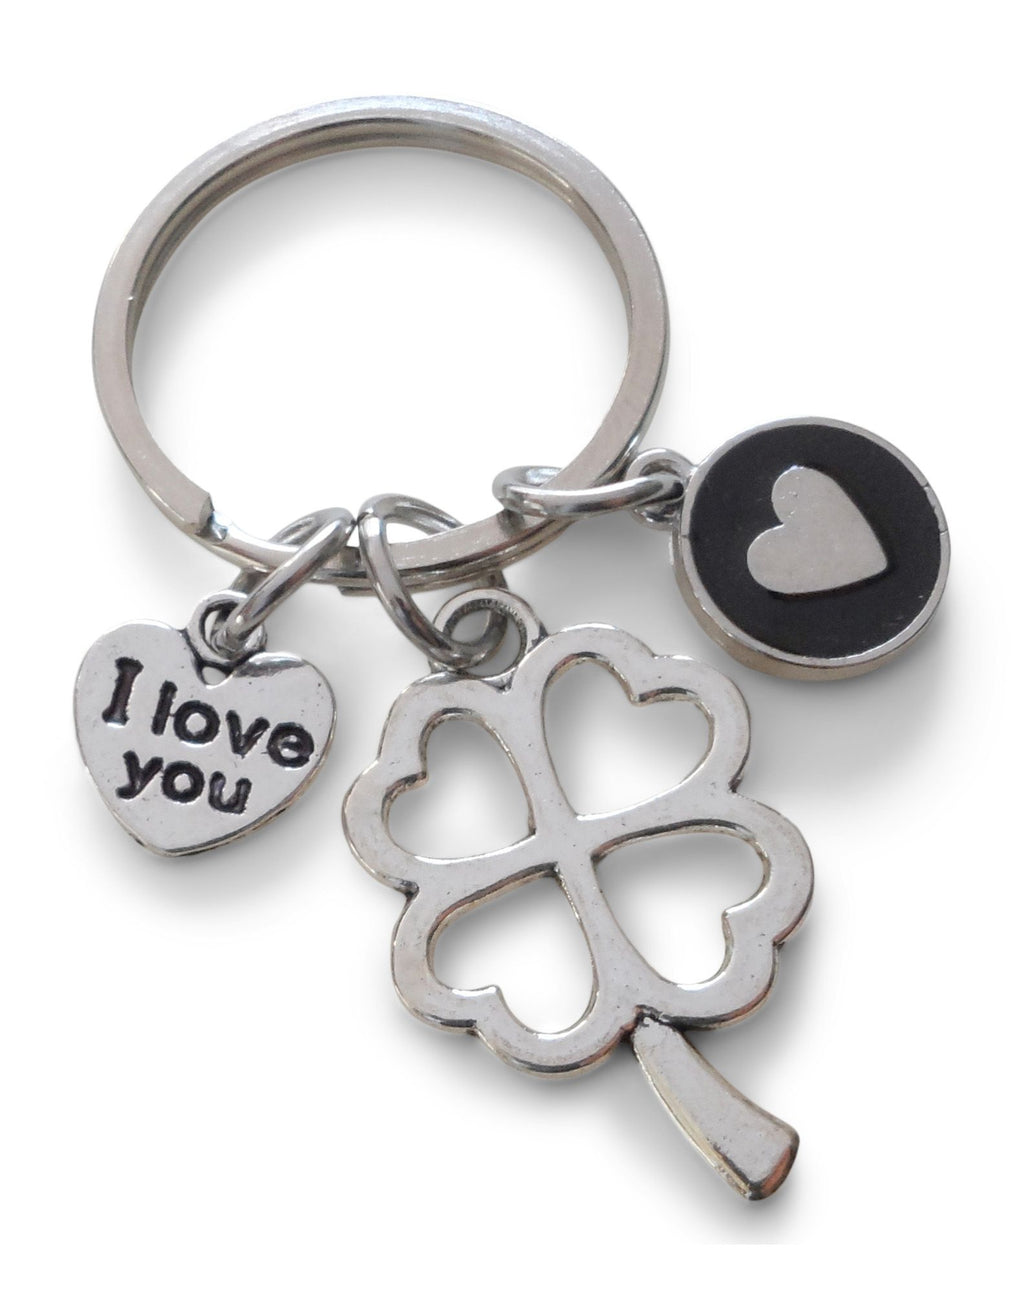 Clover Charm Keychain with I Love you Heart Charm and Circle Charm with a Heart Shape - Lucky to Have You, Couples Keychain